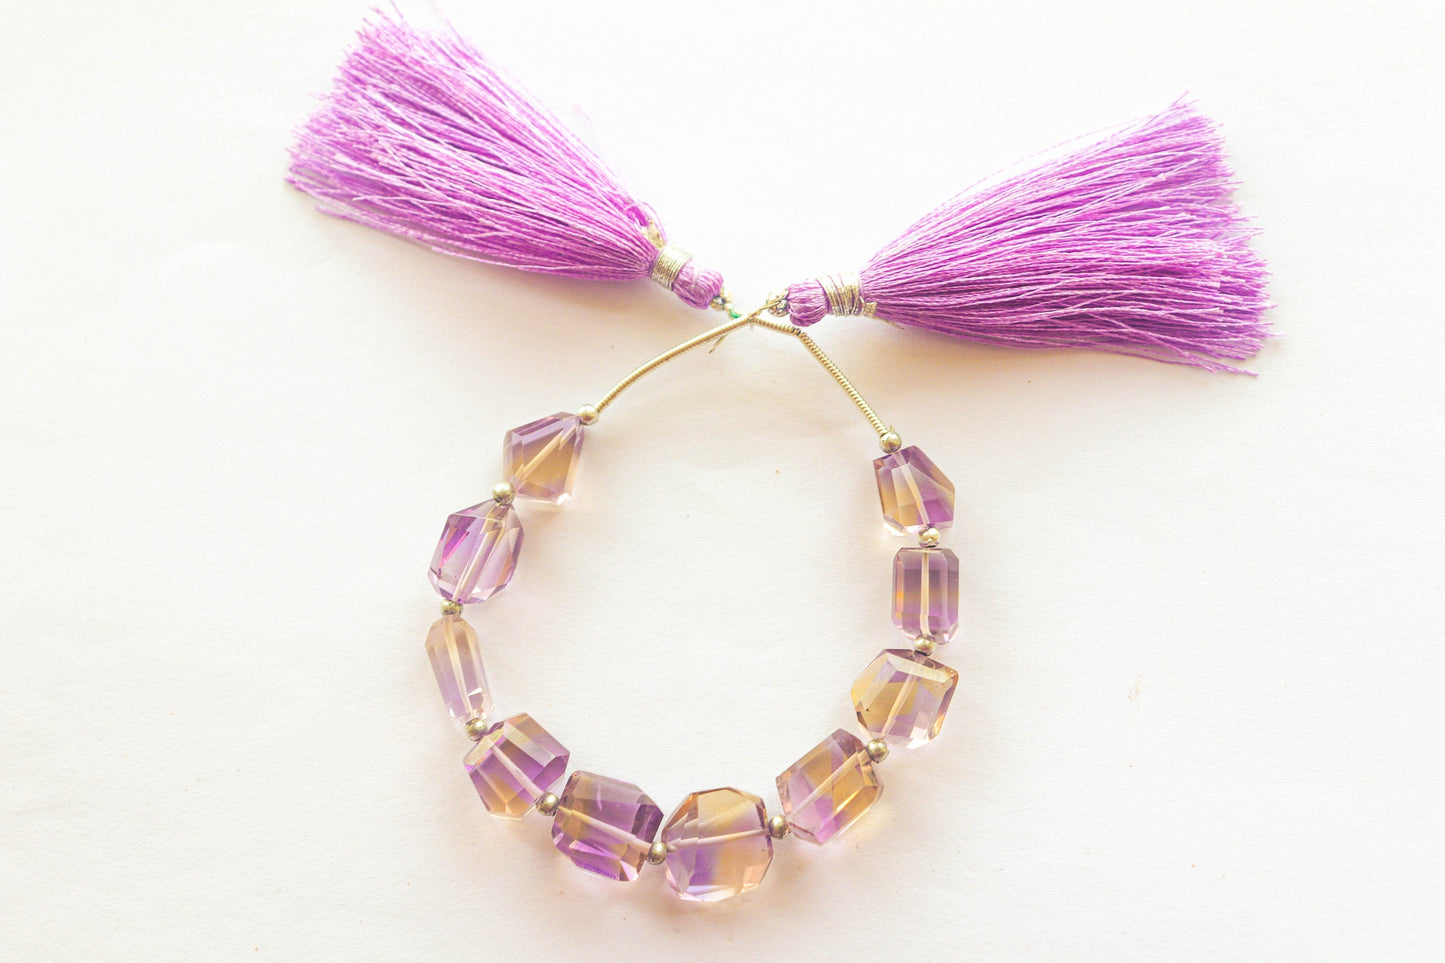 Ametrine Beads Uneven Shape Faceted Tumbles | 8x10mm-10x12mm | 10 Pieces | 5 inch | High Quality Ametrine Gemstone | Beadsforyourjewellery | BFYJ1123 Beadsforyourjewelry